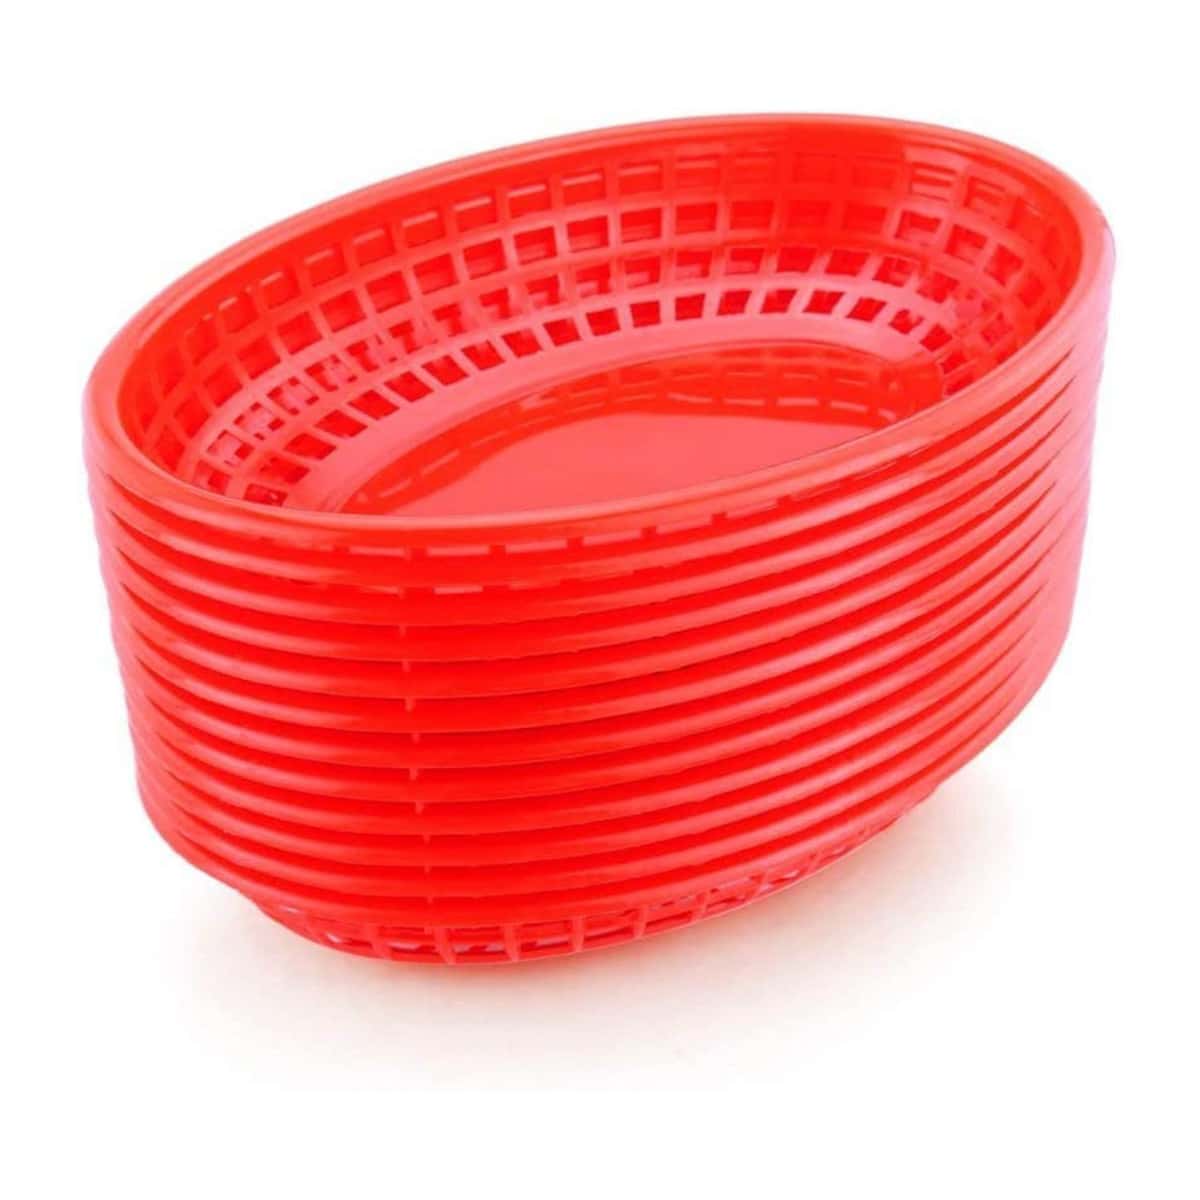 A stack of red plastic oval-shaped baskets.